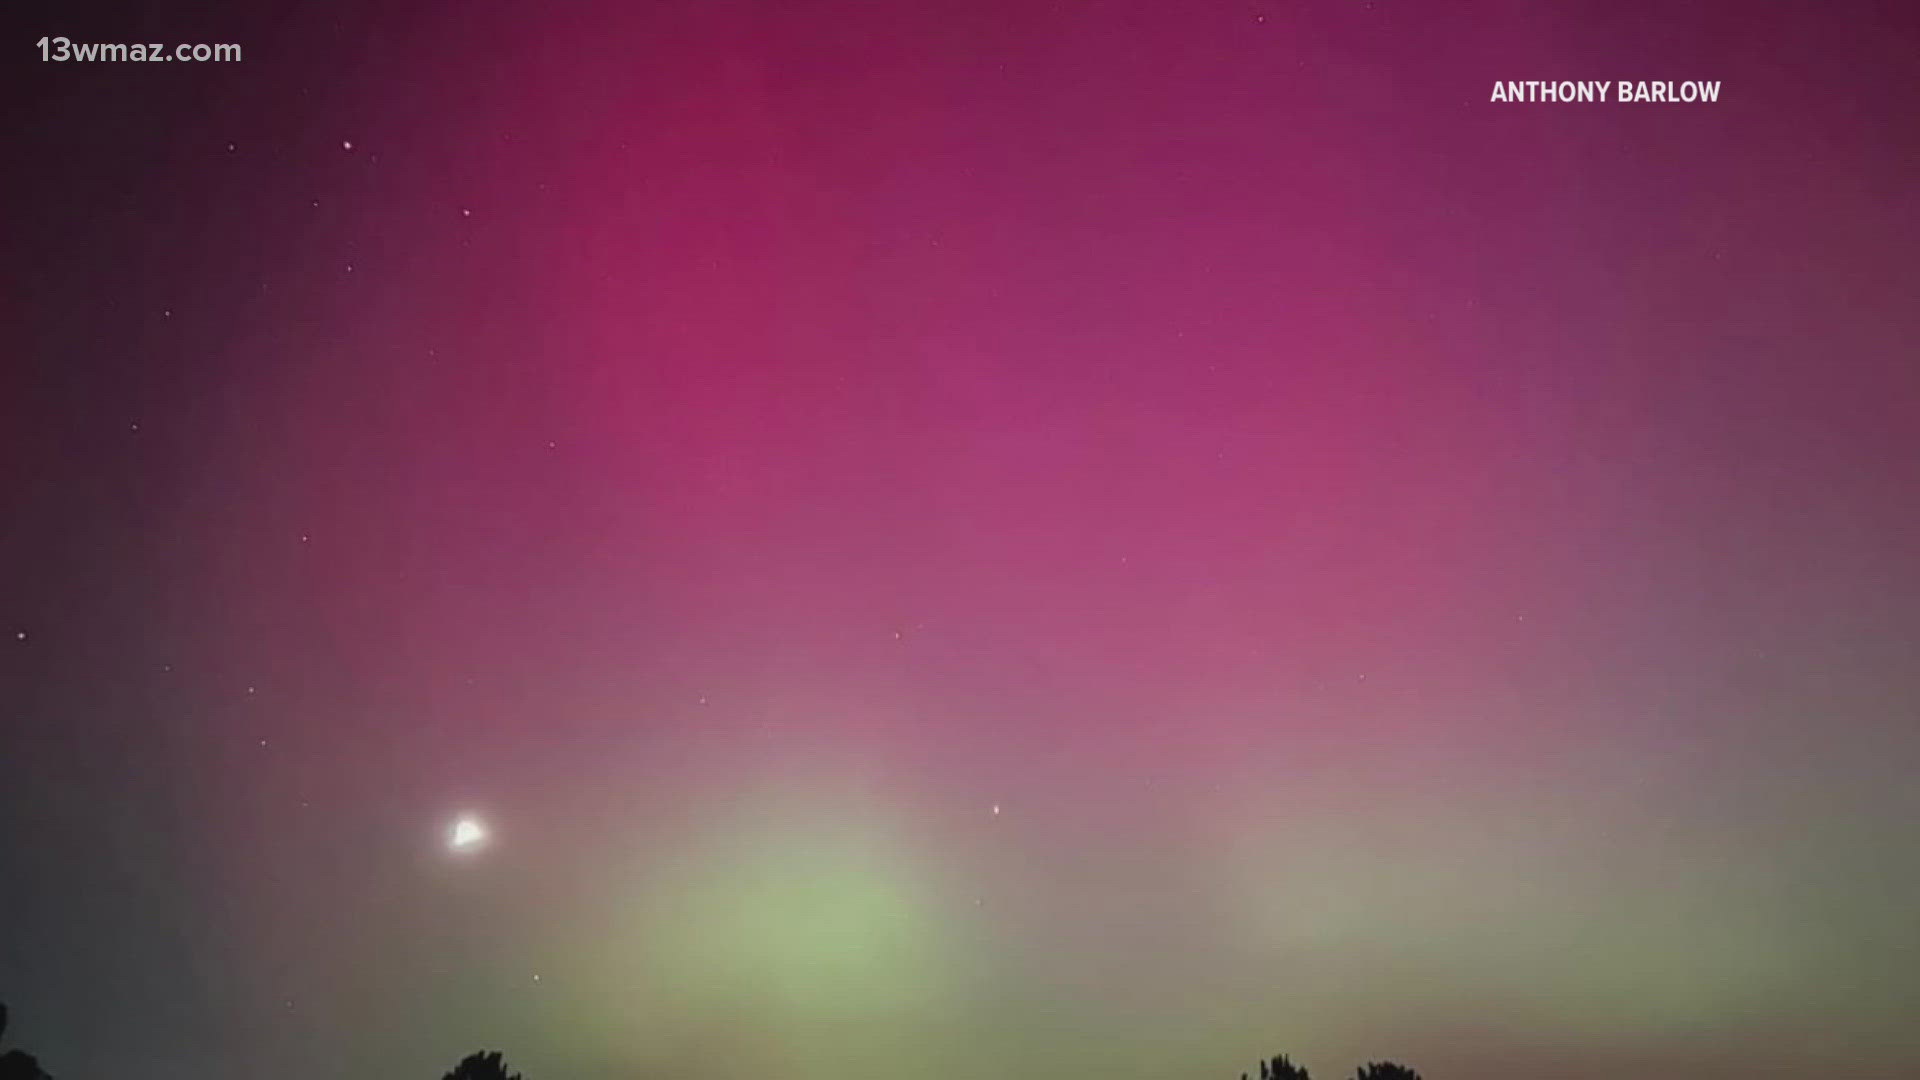 Take a look at the magical phenomena as it graced the skies of Central Georgia